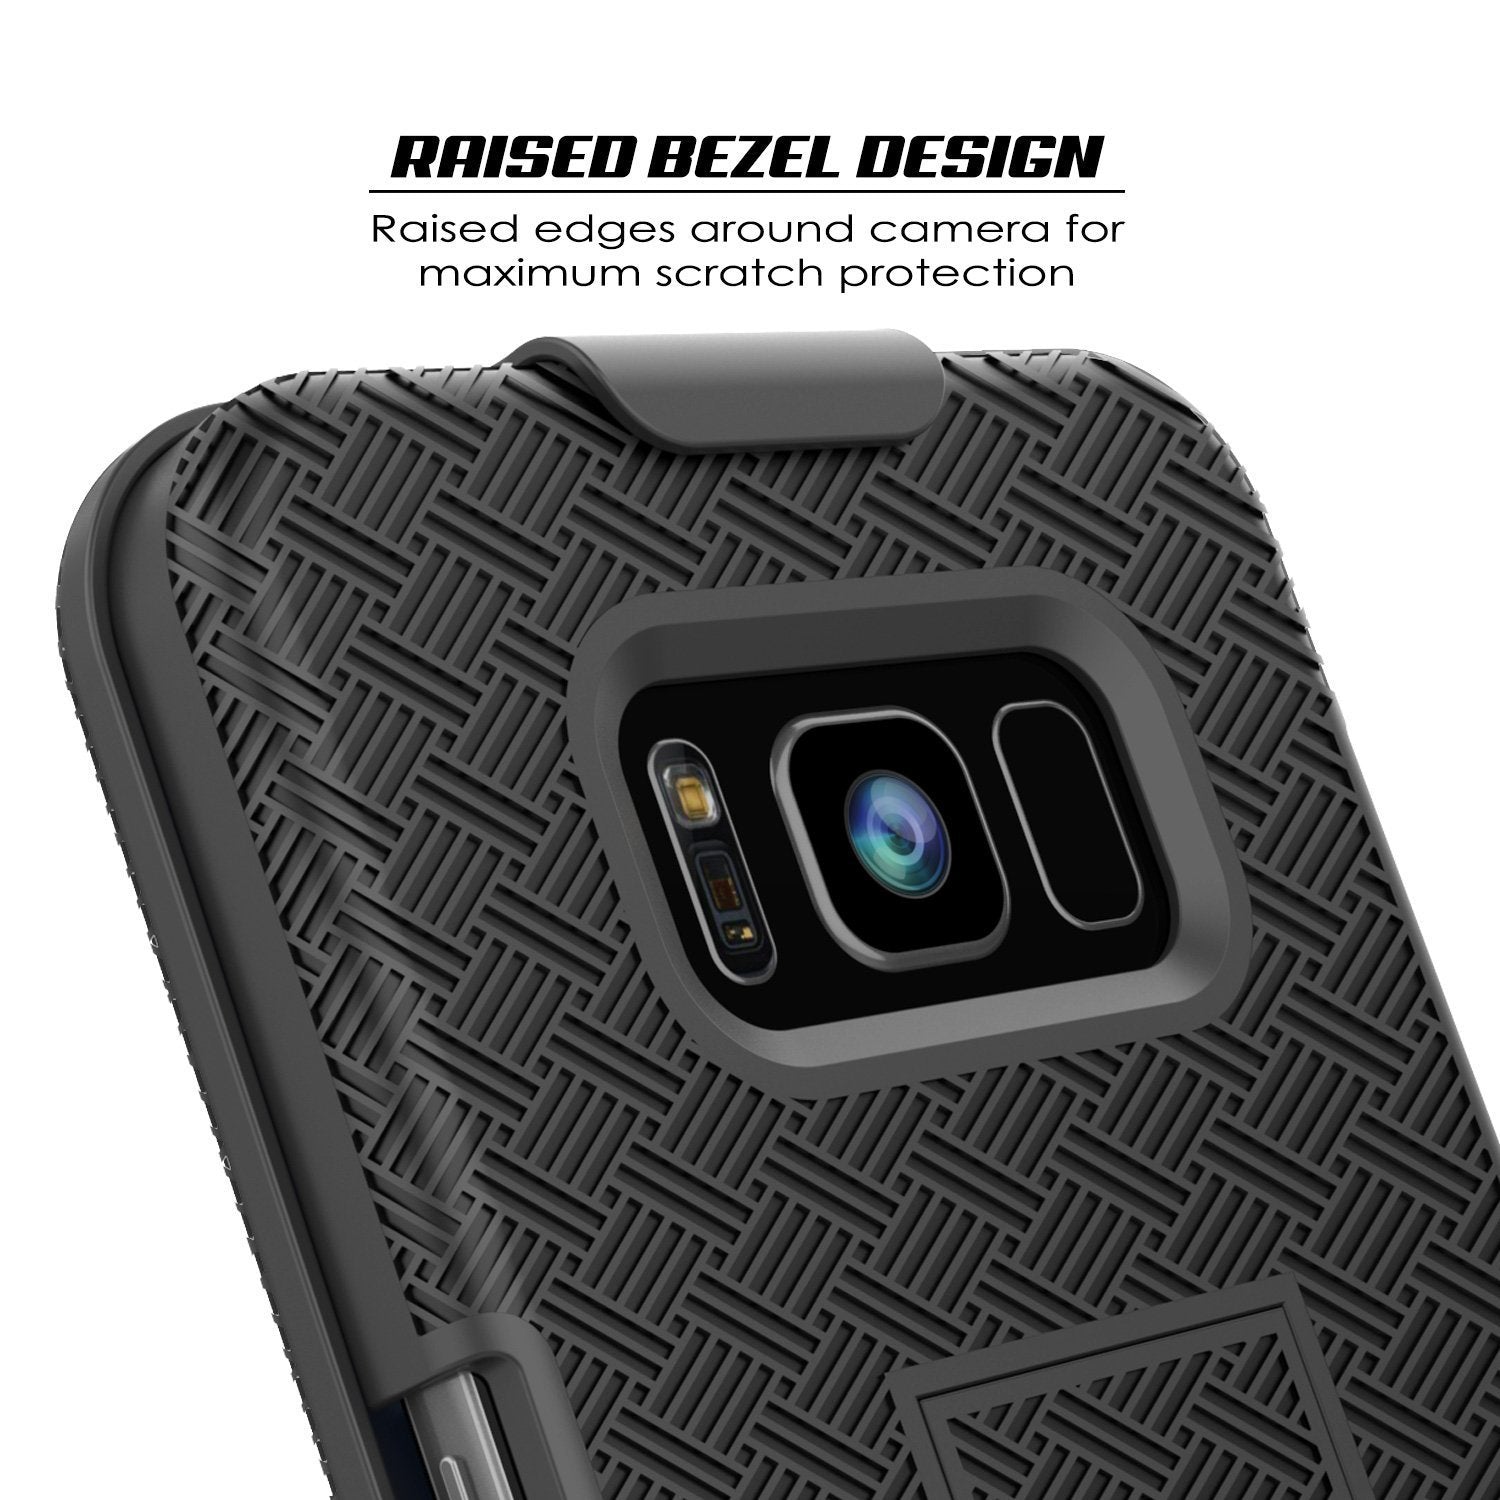 Punkcase Galaxy S8 Case, With PunkShield Glass Screen Protector, Holster Belt Clip & Built-In Kickstand Non-Slip Dual Layer Hybrid TPU Full Body Protection for Samsung S8 Edge [Black]